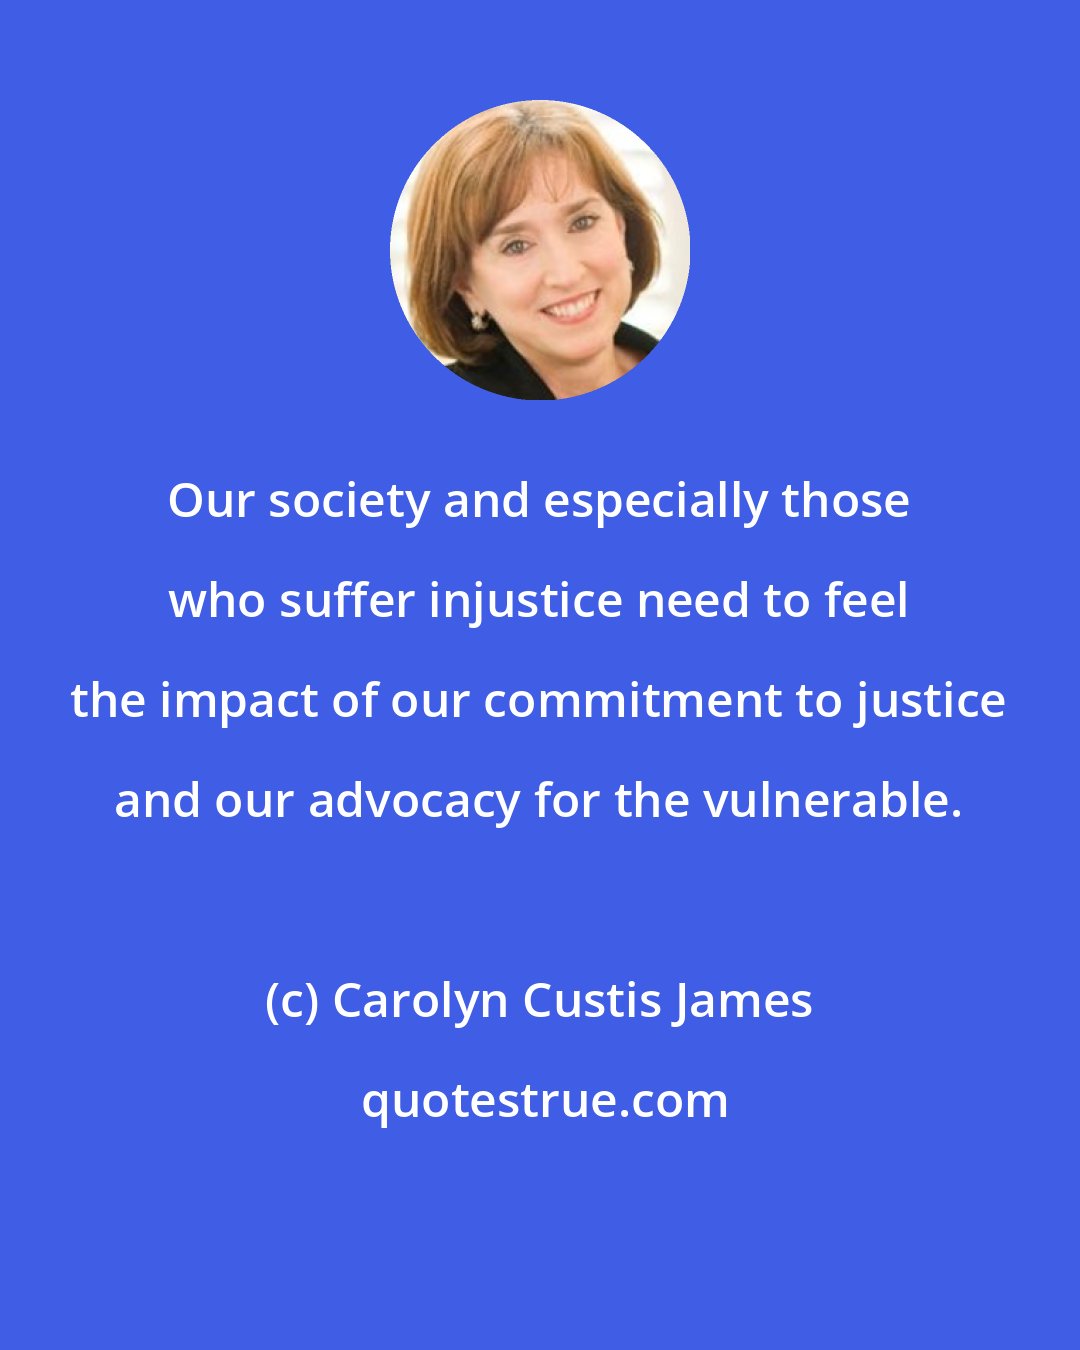 Carolyn Custis James: Our society and especially those who suffer injustice need to feel the impact of our commitment to justice and our advocacy for the vulnerable.